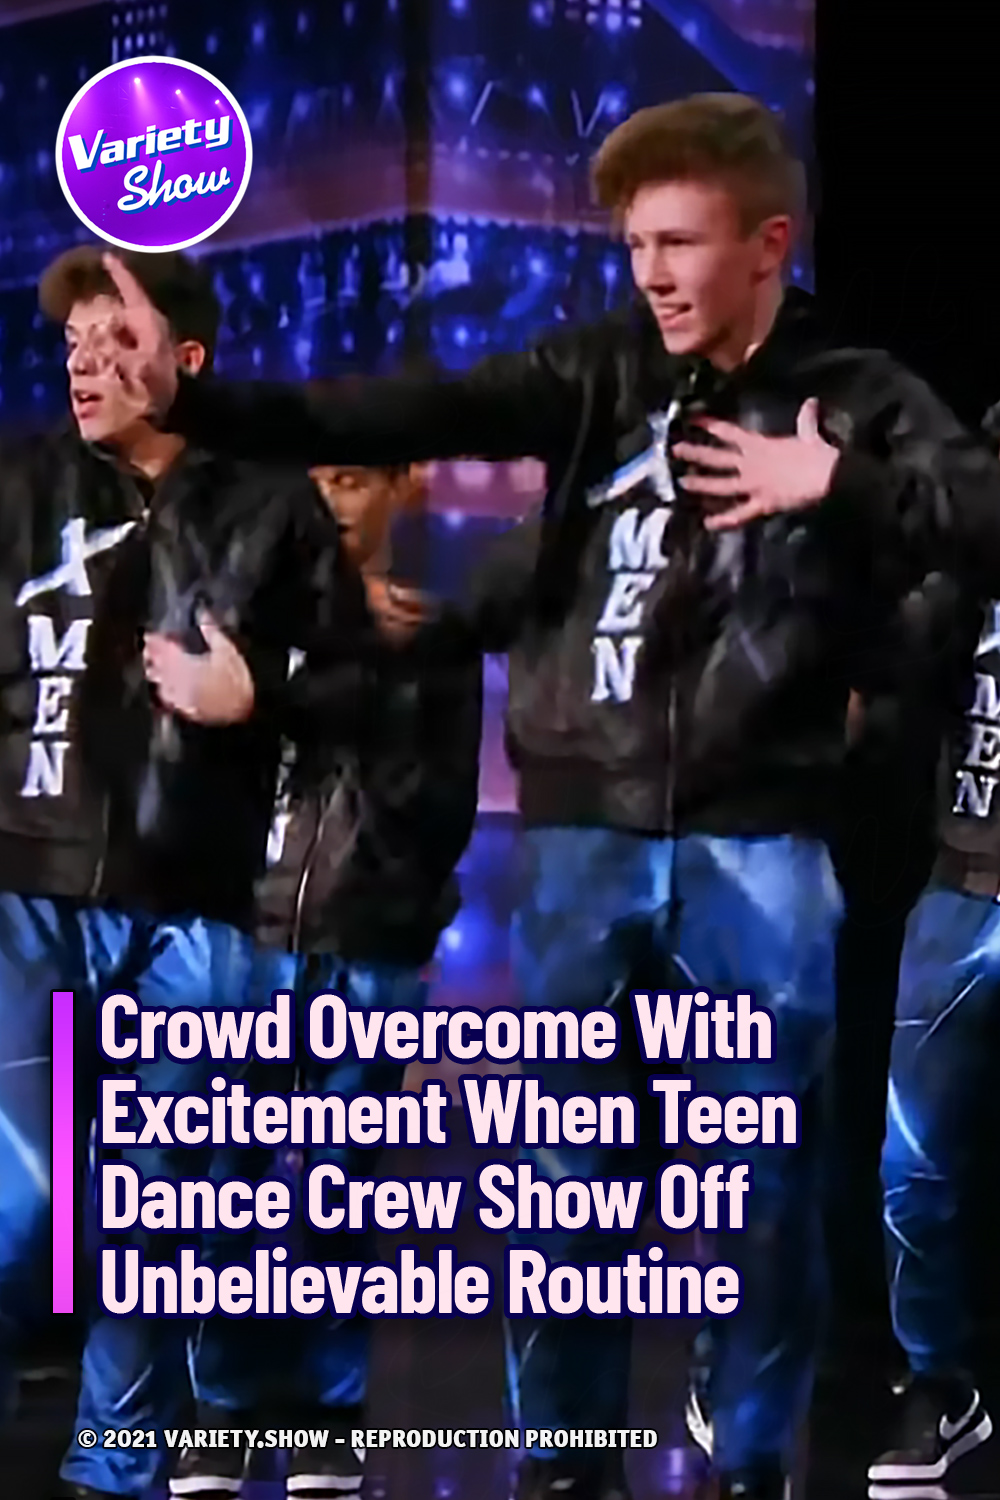 Crowd Overcome With Excitement When Teen Dance Crew Show Off Unbelievable Routine